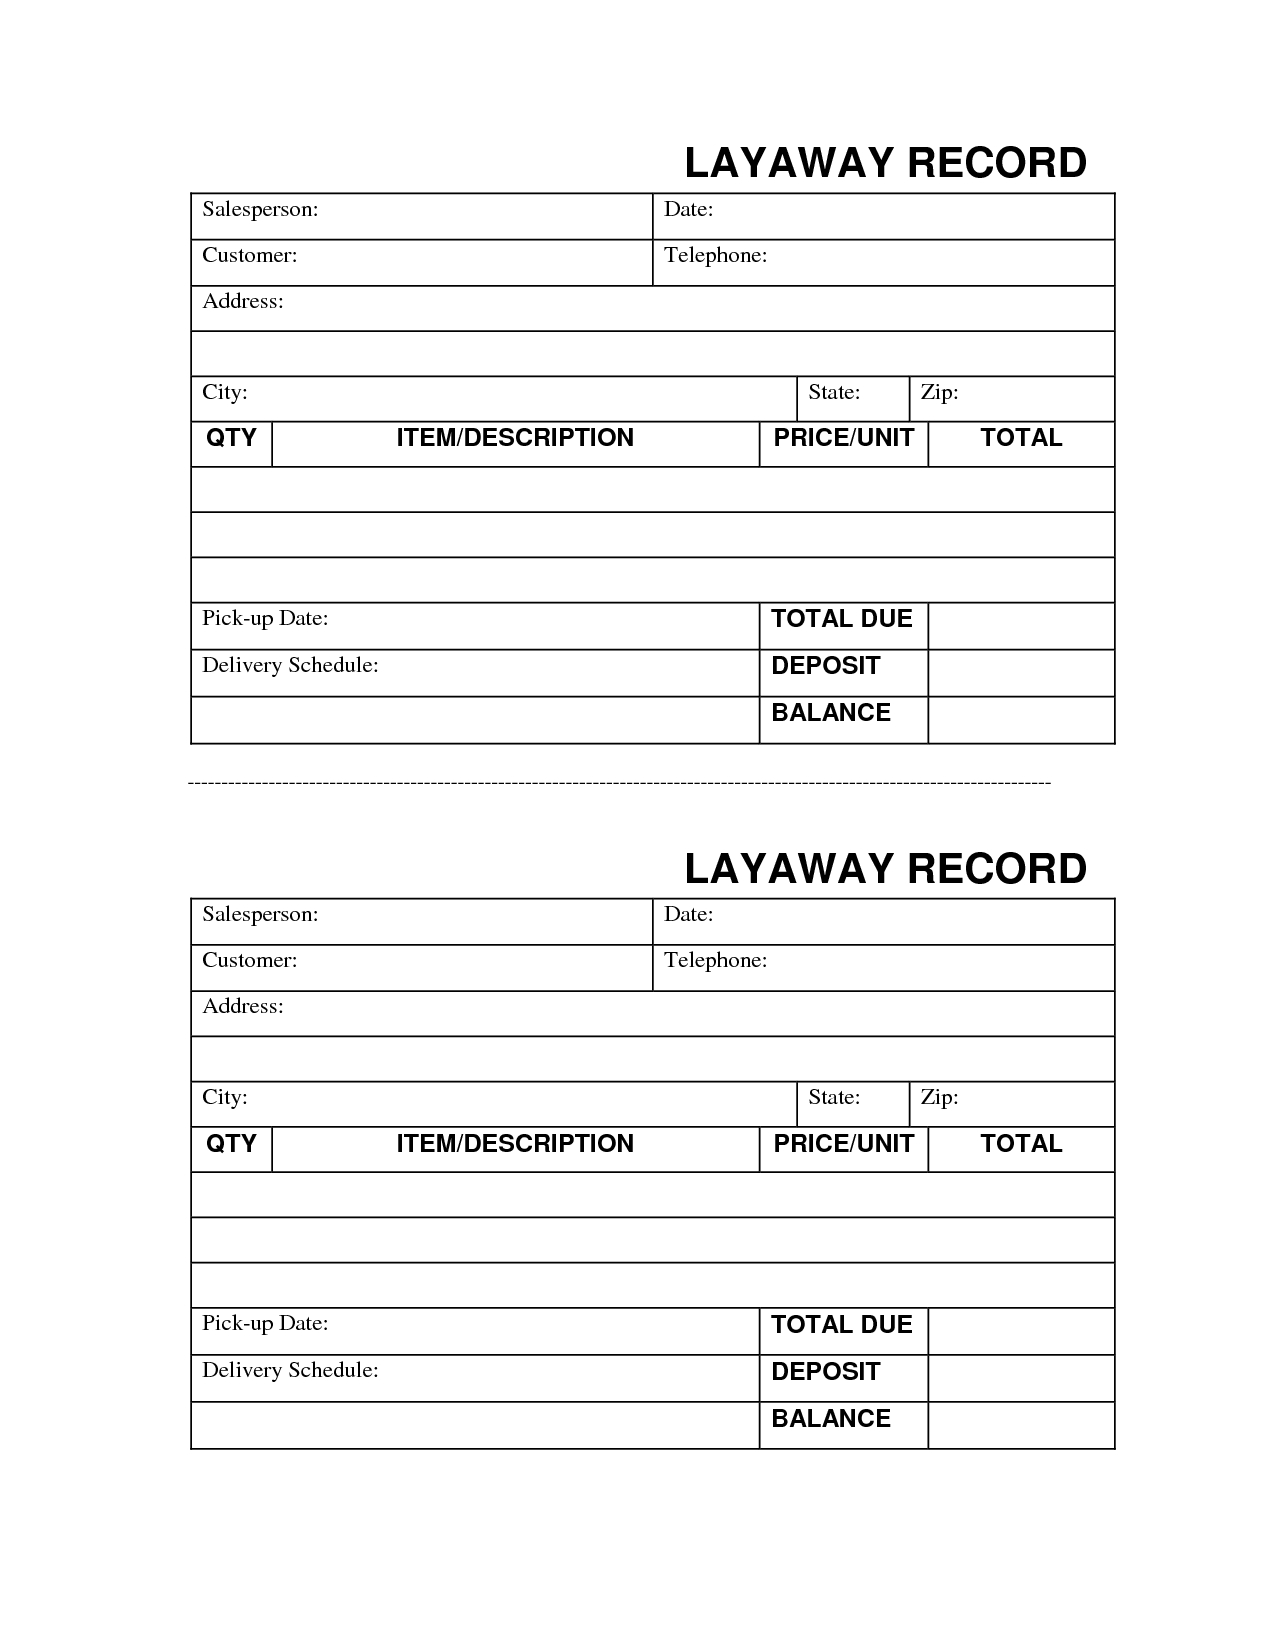 Layaway Agreement Template. Other Printable Images Gallery Category